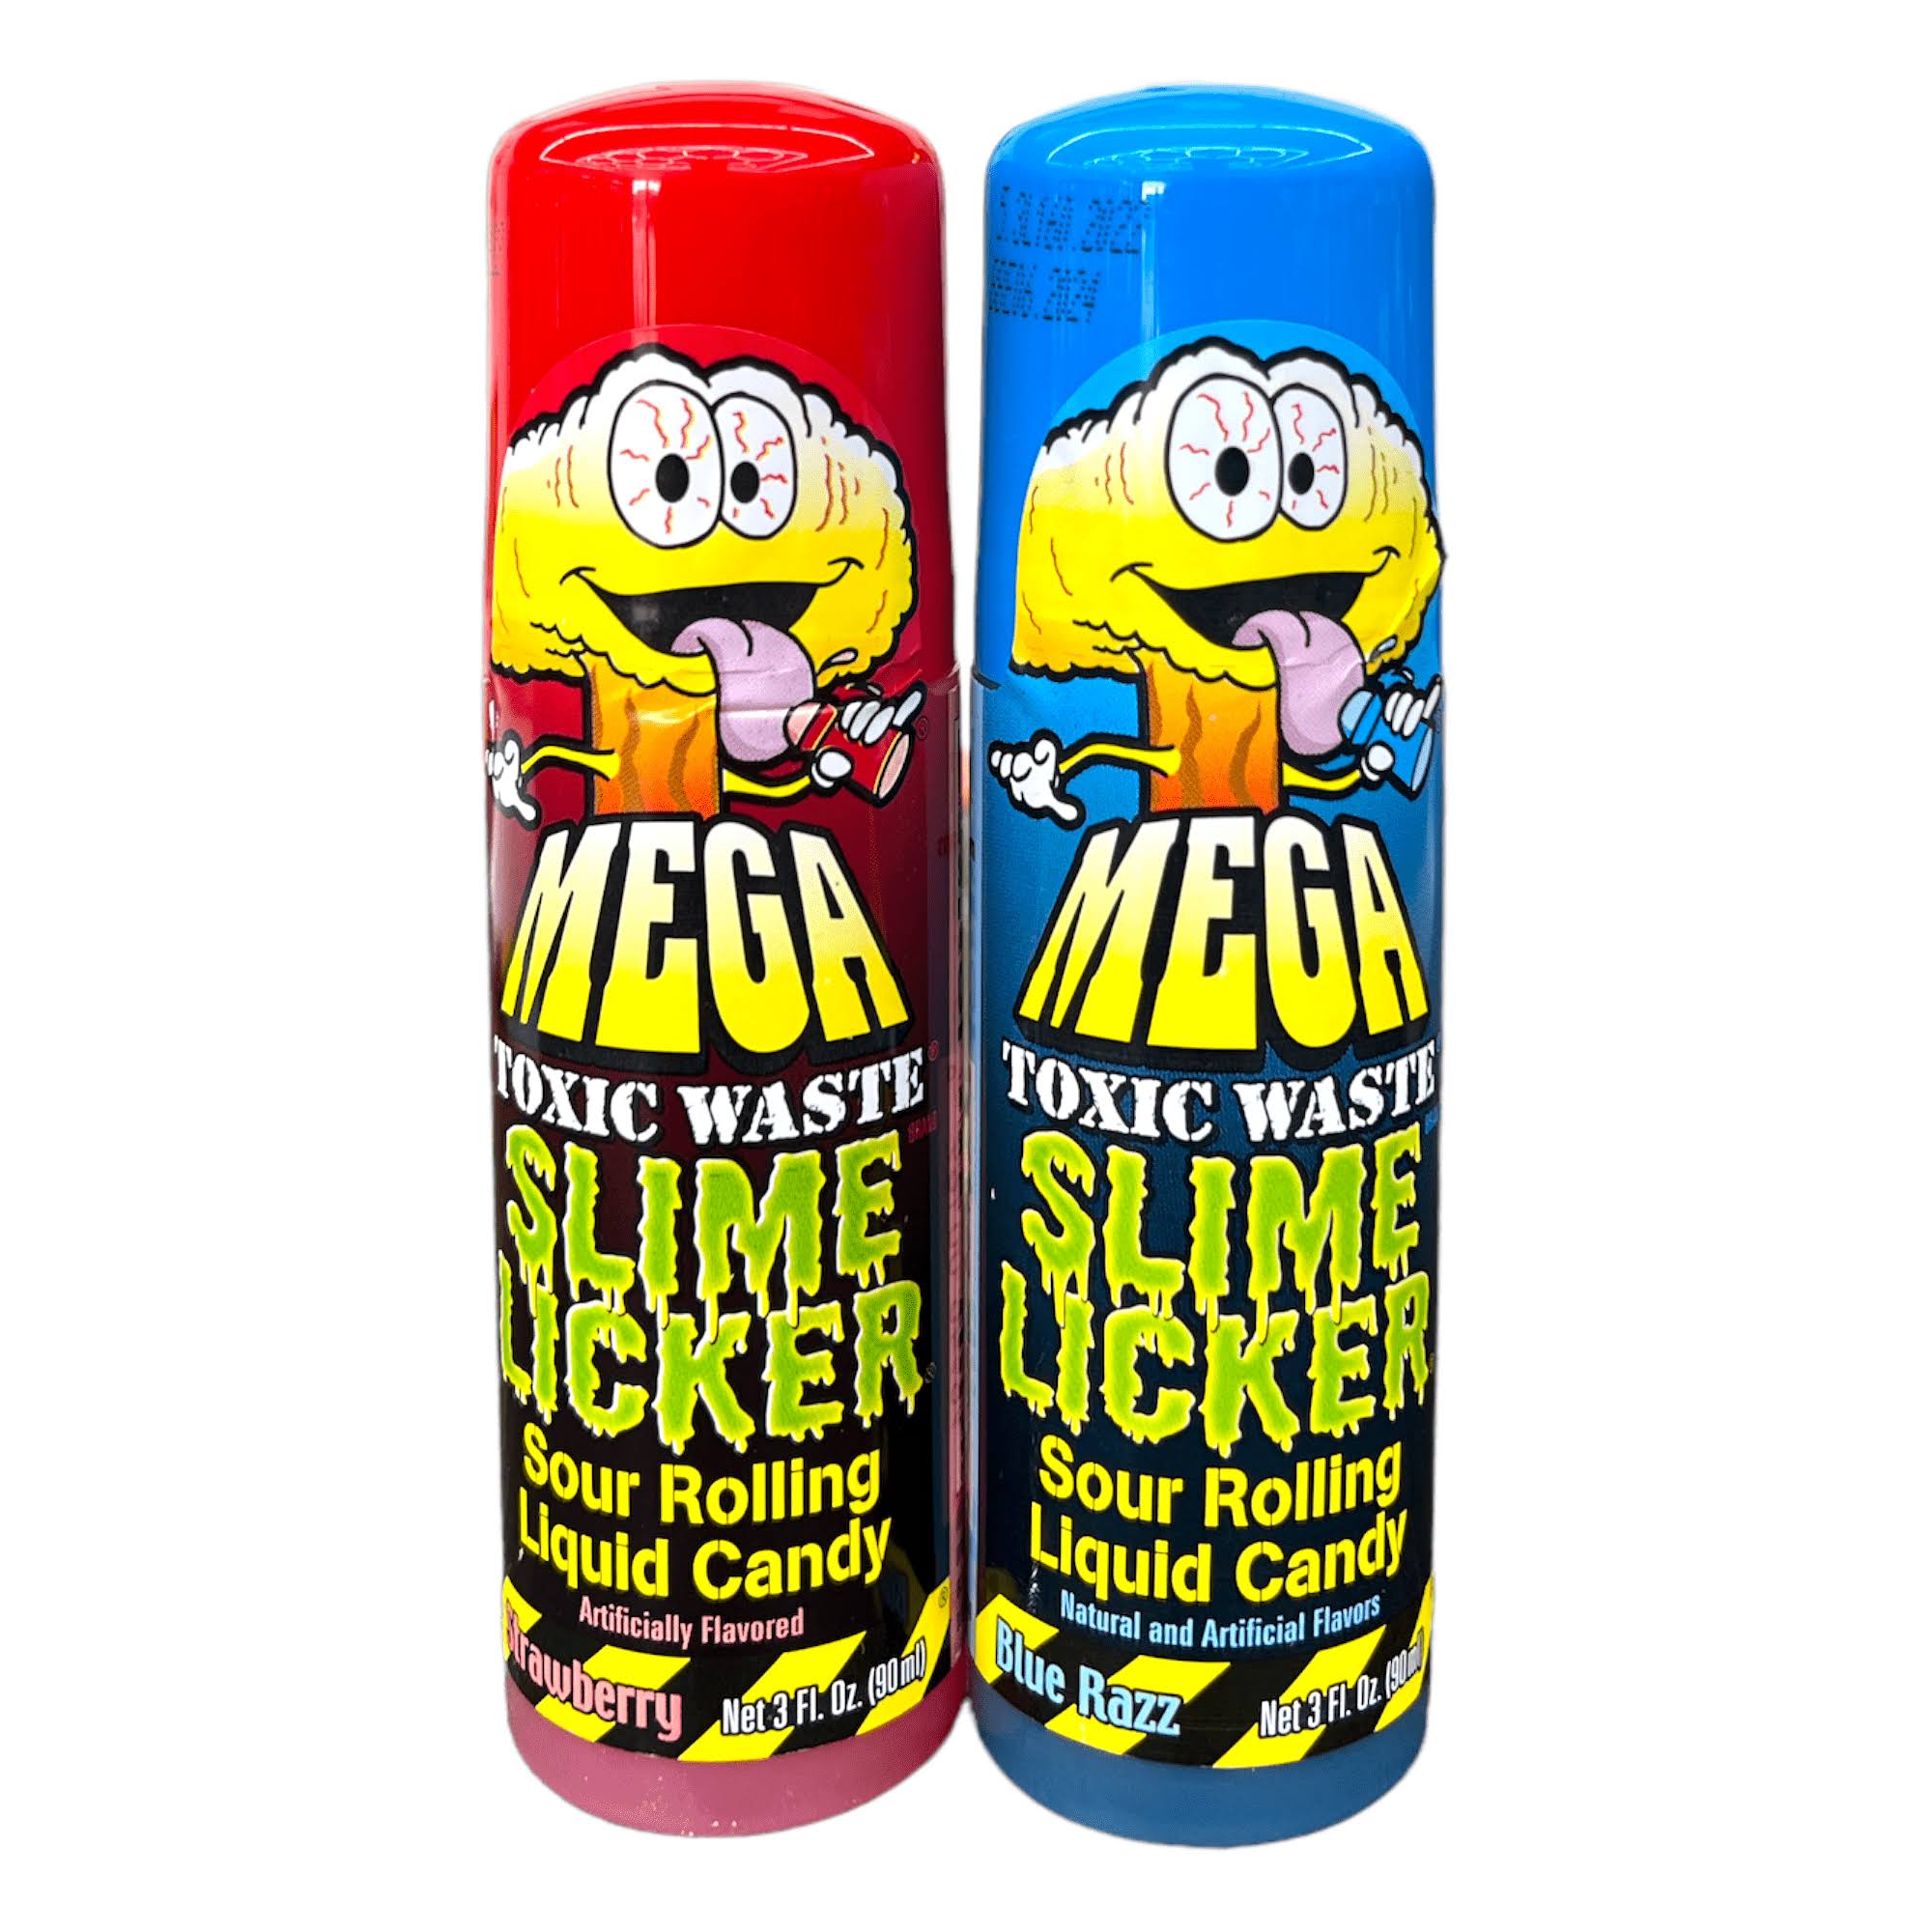 Slime Licker MEGA Size - 2-Pack of Sour Rolling Liquid Candy - TWO Blu